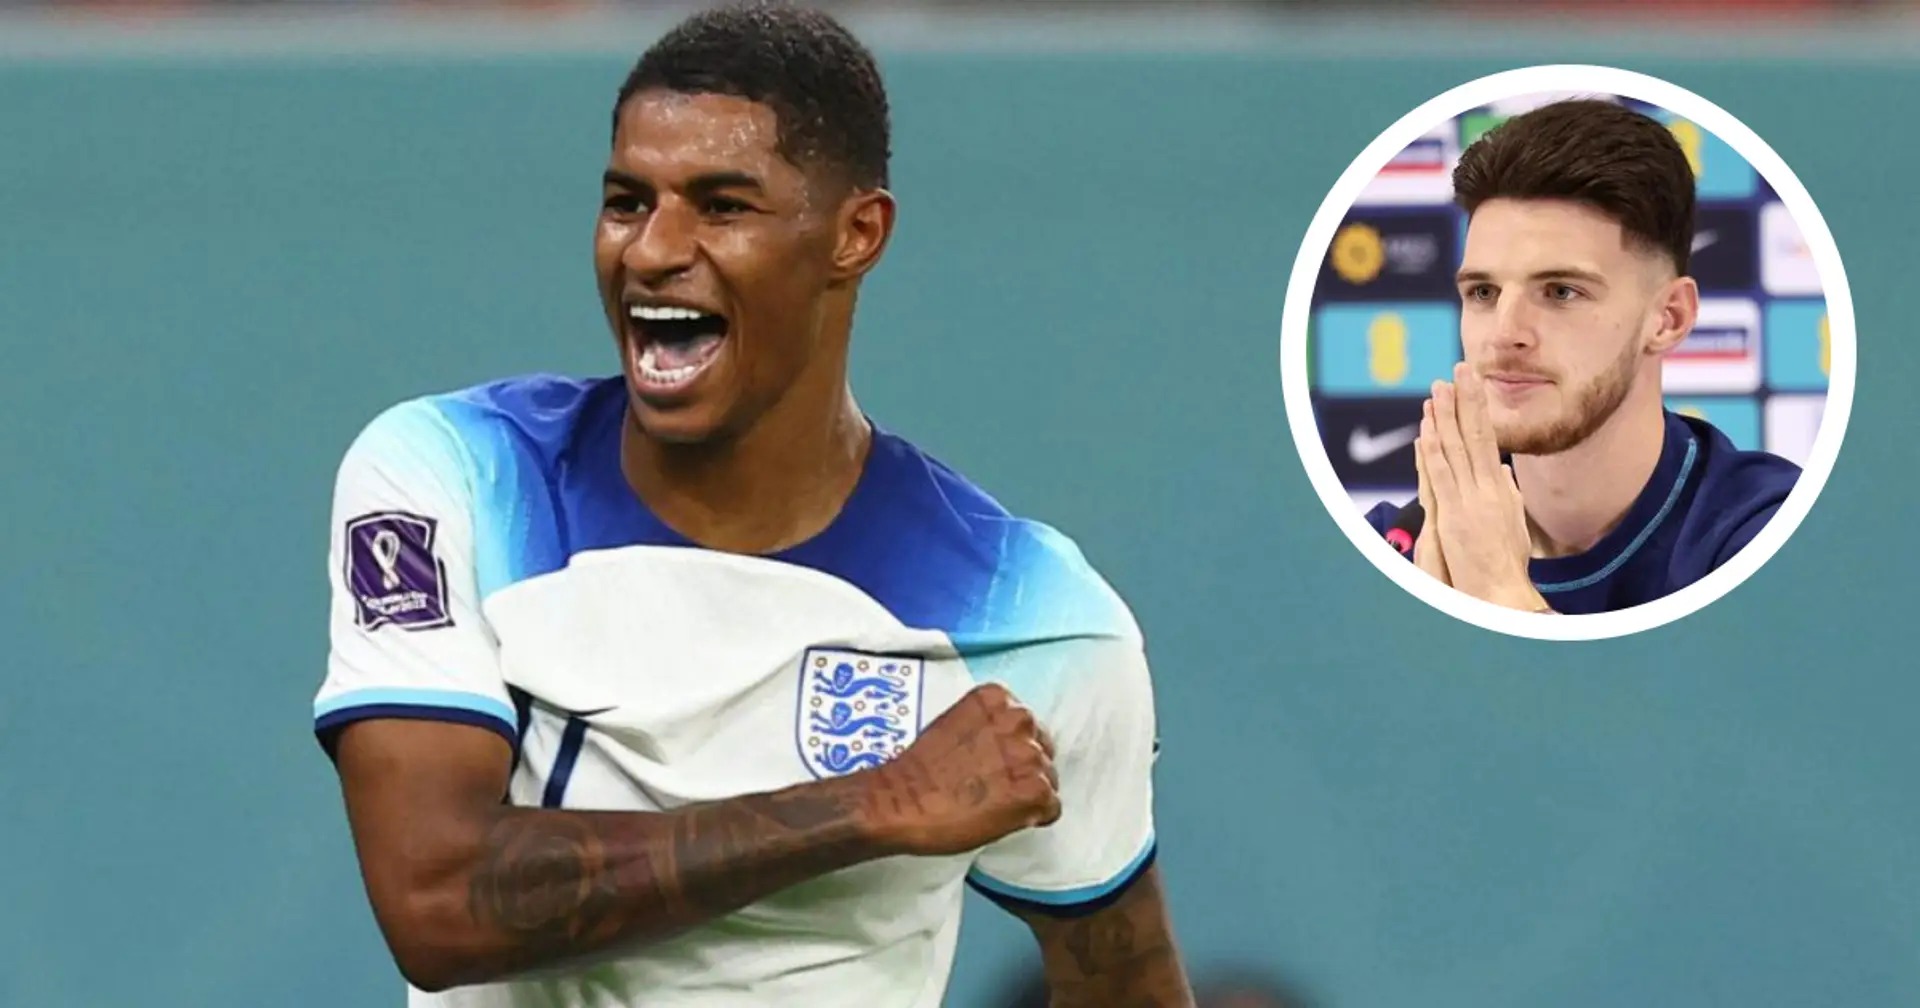 West Ham's Declan Rice backs Marcus Rashford to compete for World Cup Golden Boot